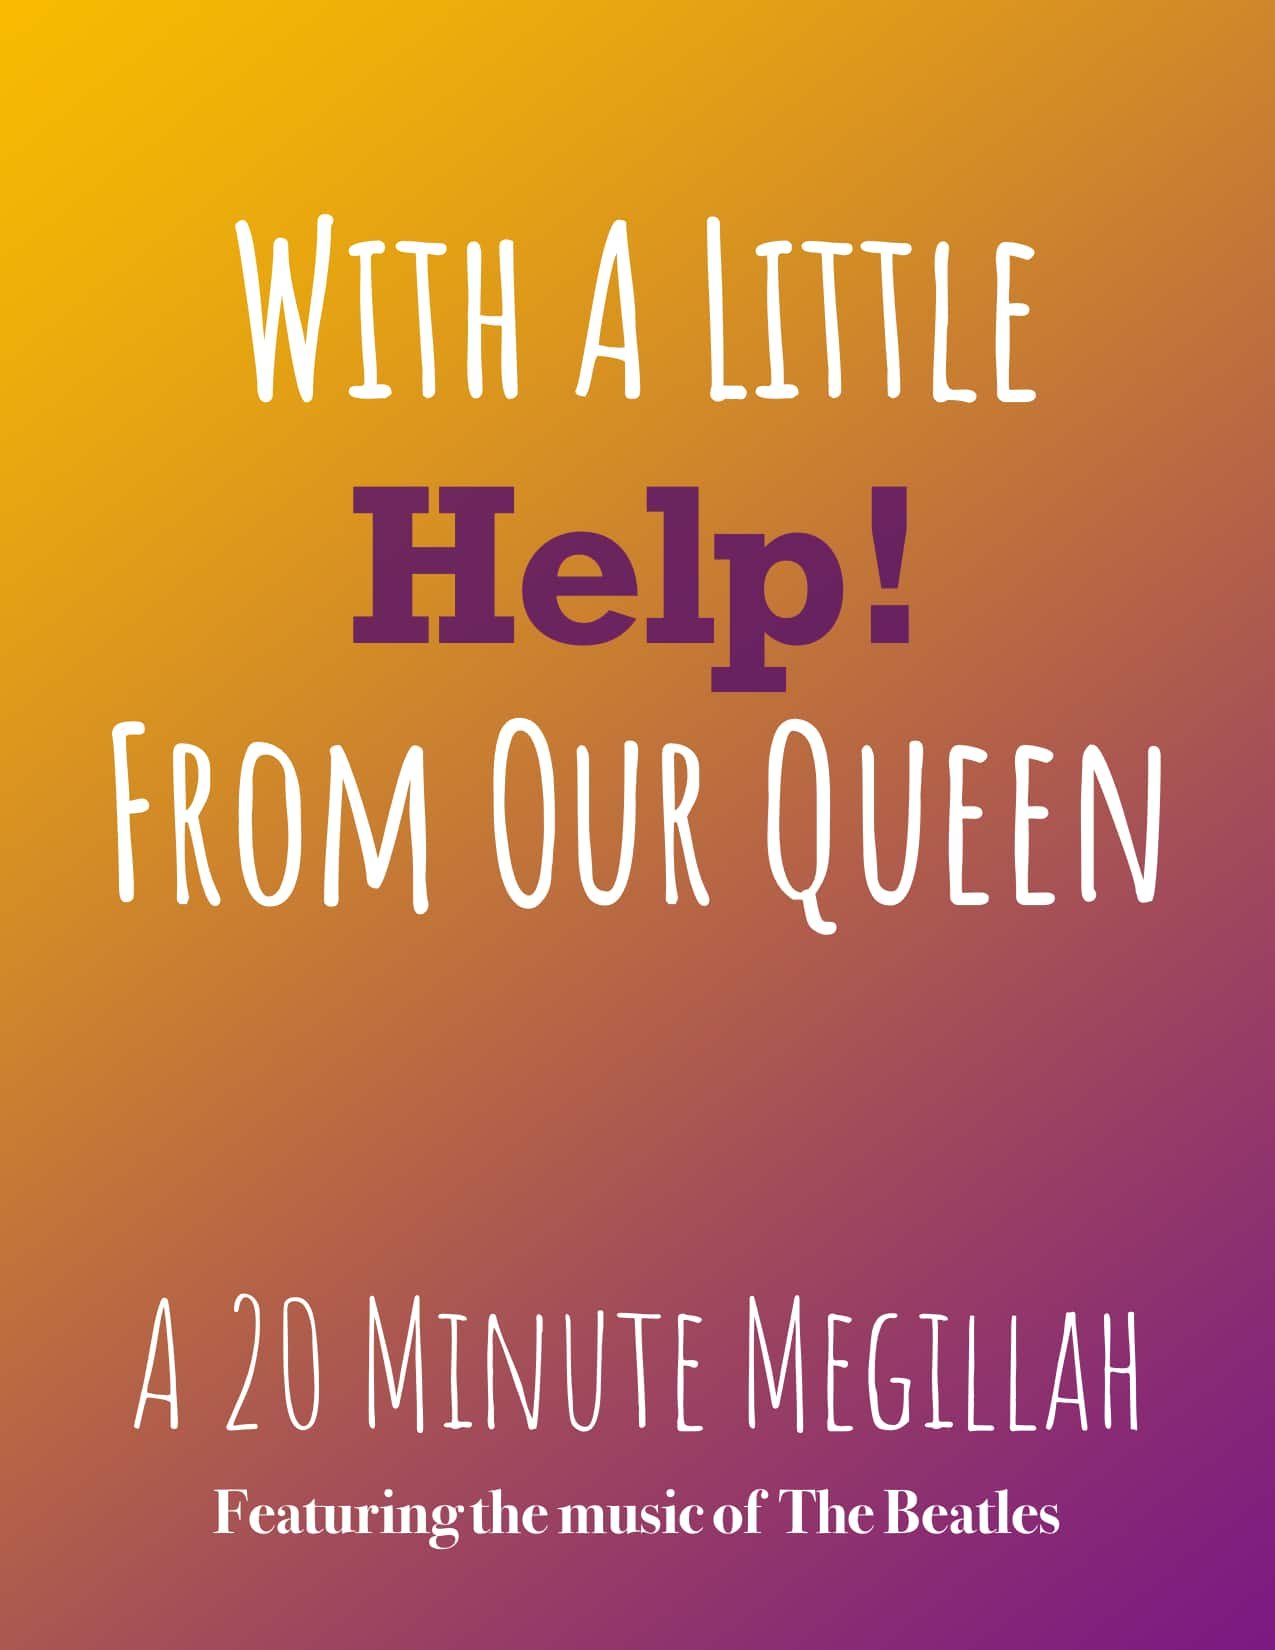 With a Little Help From Our Queen poster@0.5x.jpg